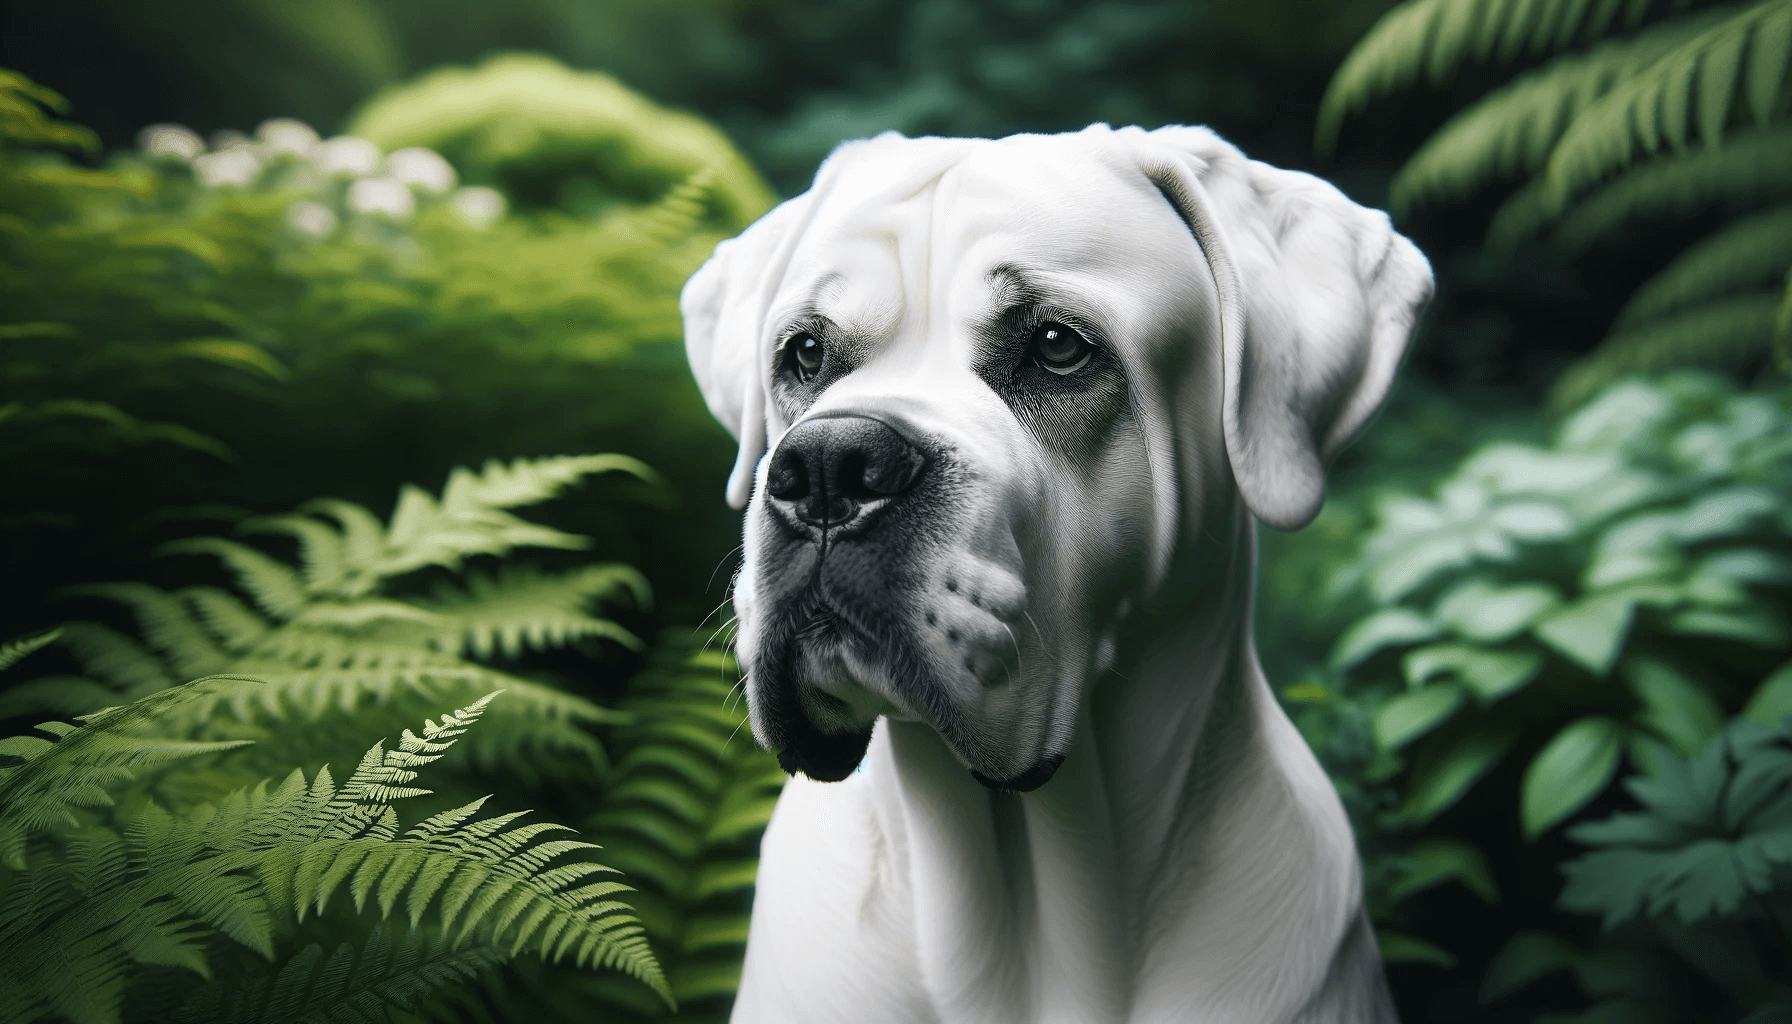 A noble White Cane Corso with a backdrop of foliage, focusing on the breed's noble head and expression.